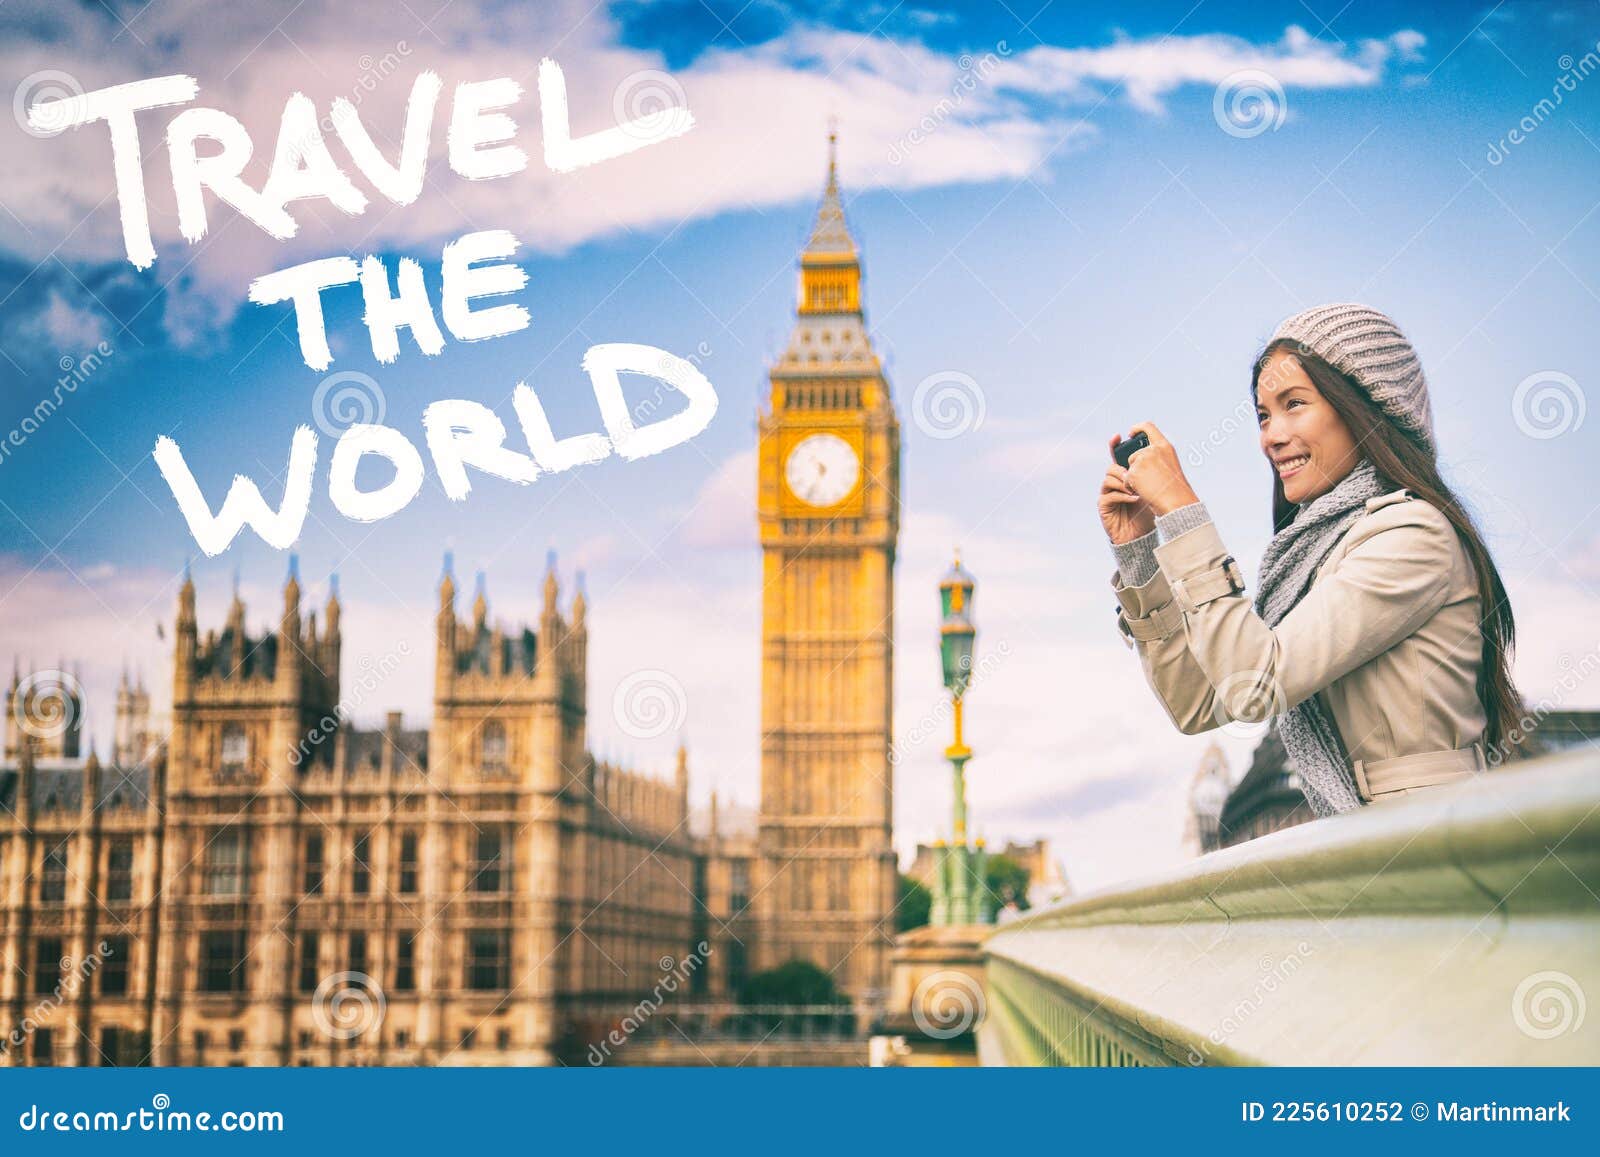 A Lady in London - And Traveling the World